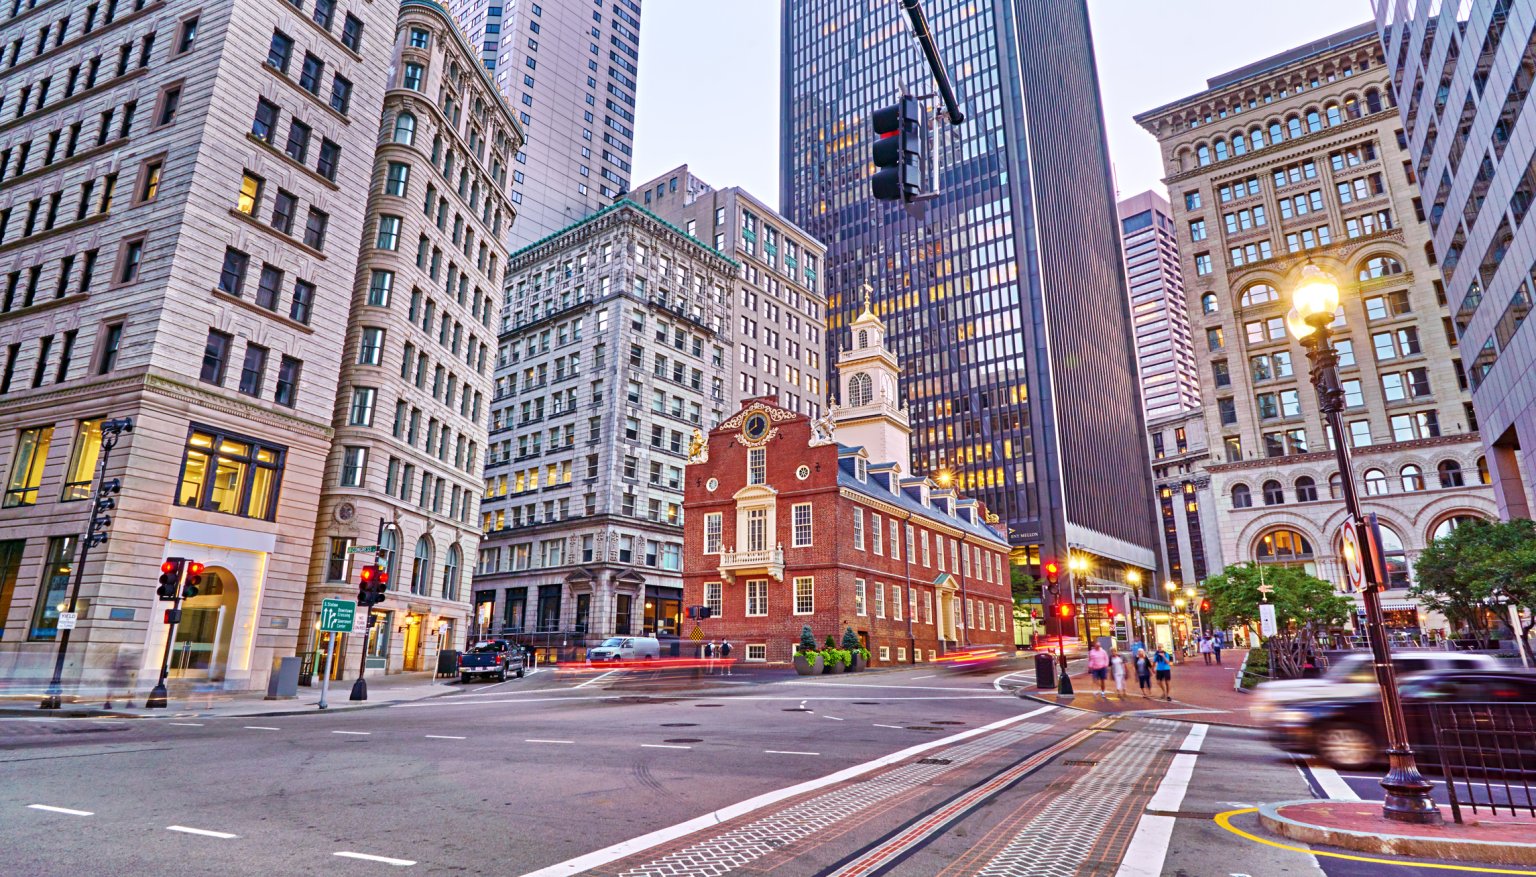 Top 20 Best Cities to Live in the USA - Boston, Massachusetts